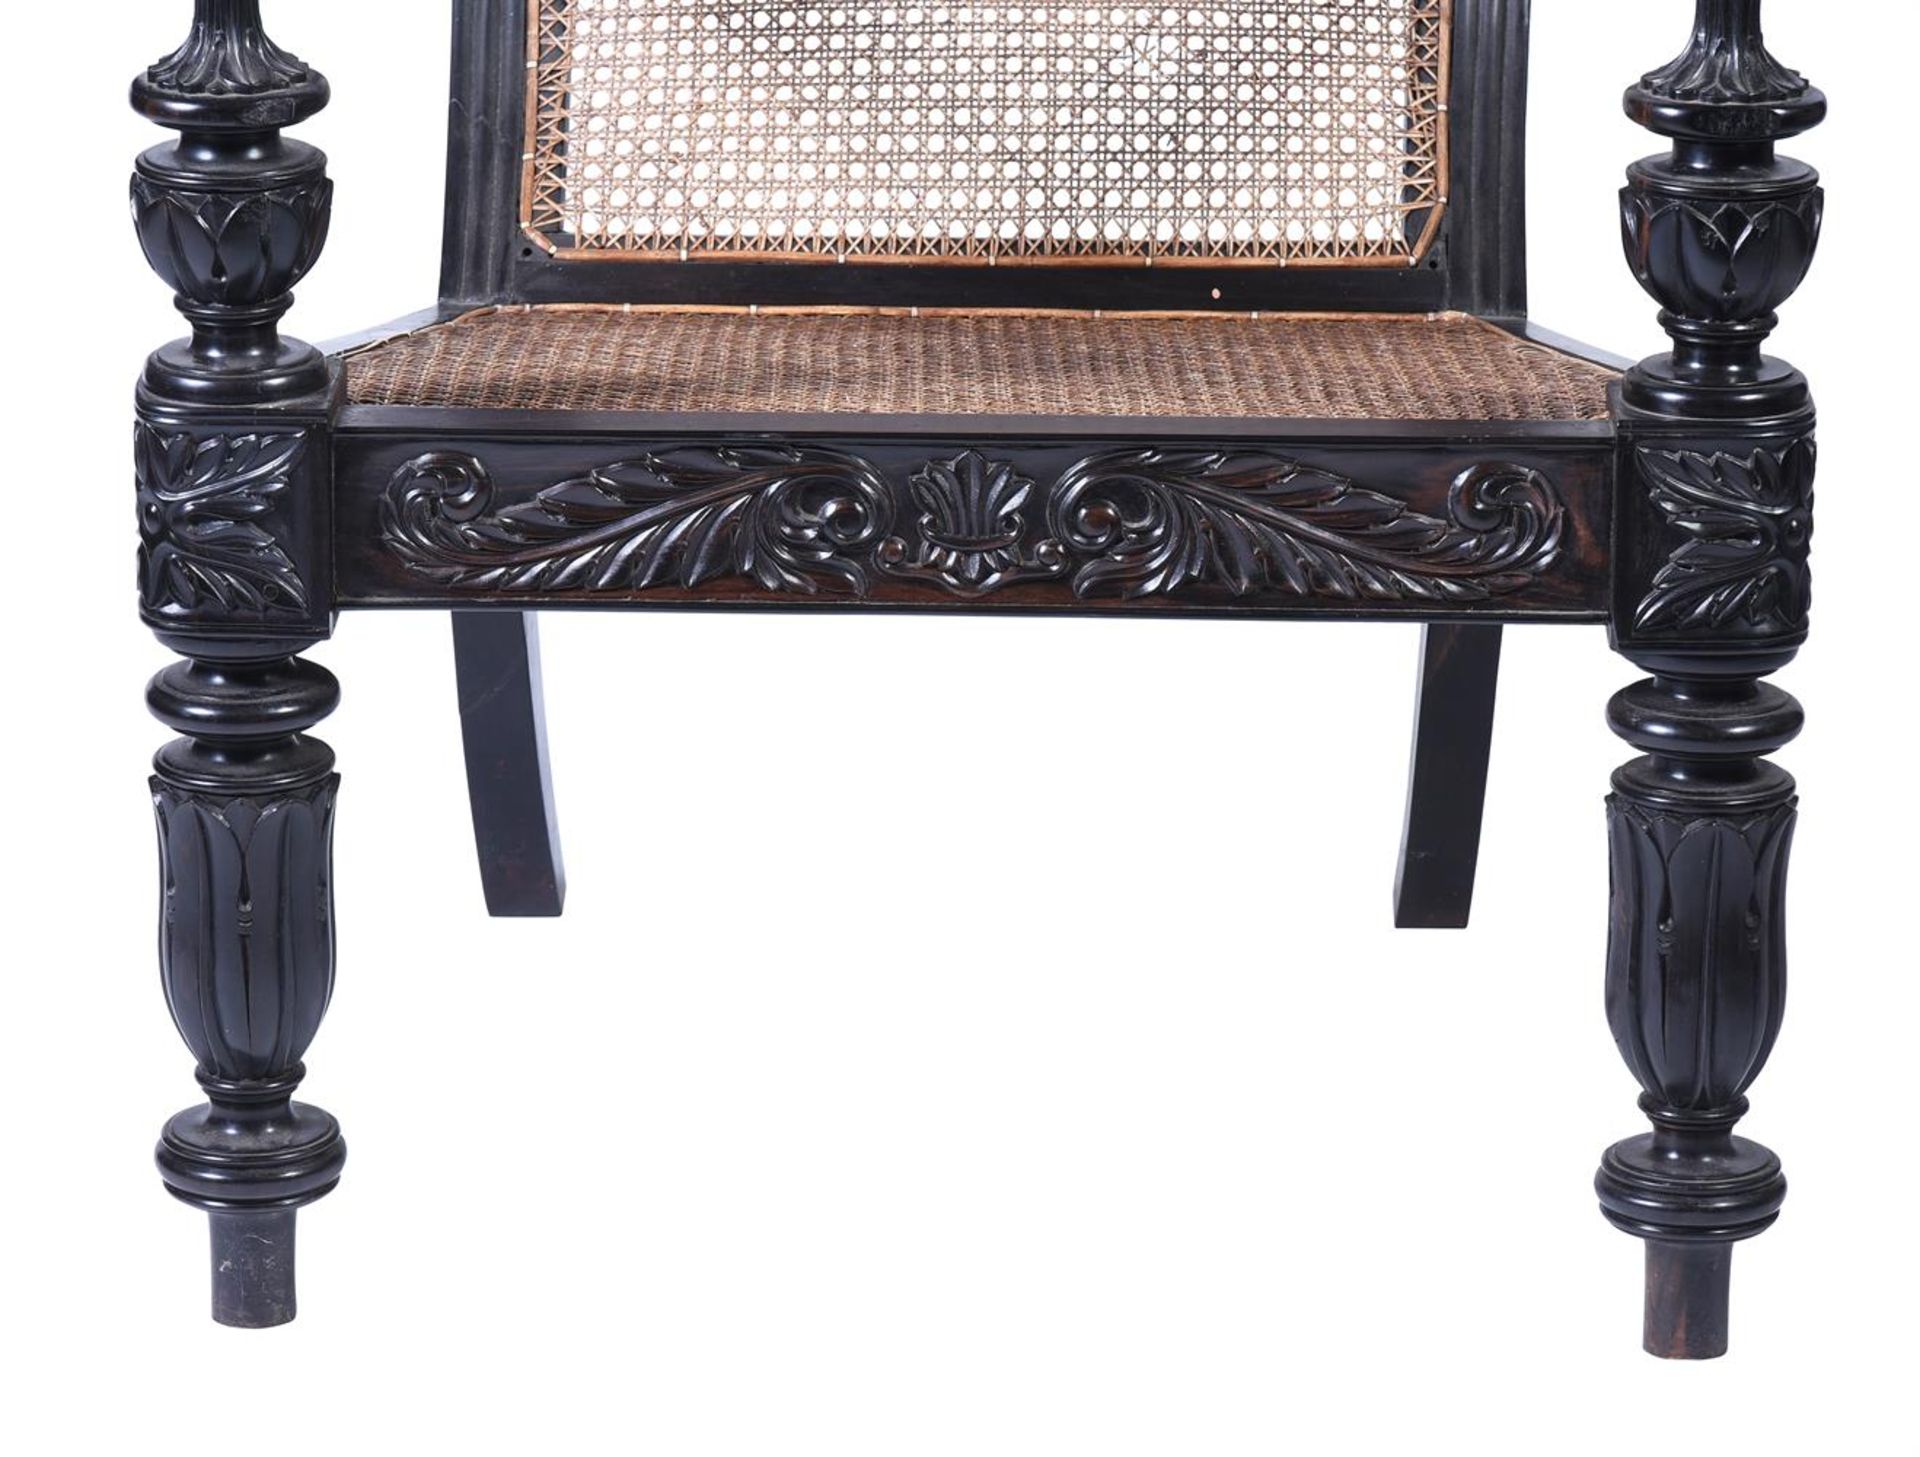 Y A CEYLONESE CARVED EBONY ARMCHAIR, PROBABLY GALLE DISTRICT, FIRST HALF 19TH CENTURY - Image 4 of 5